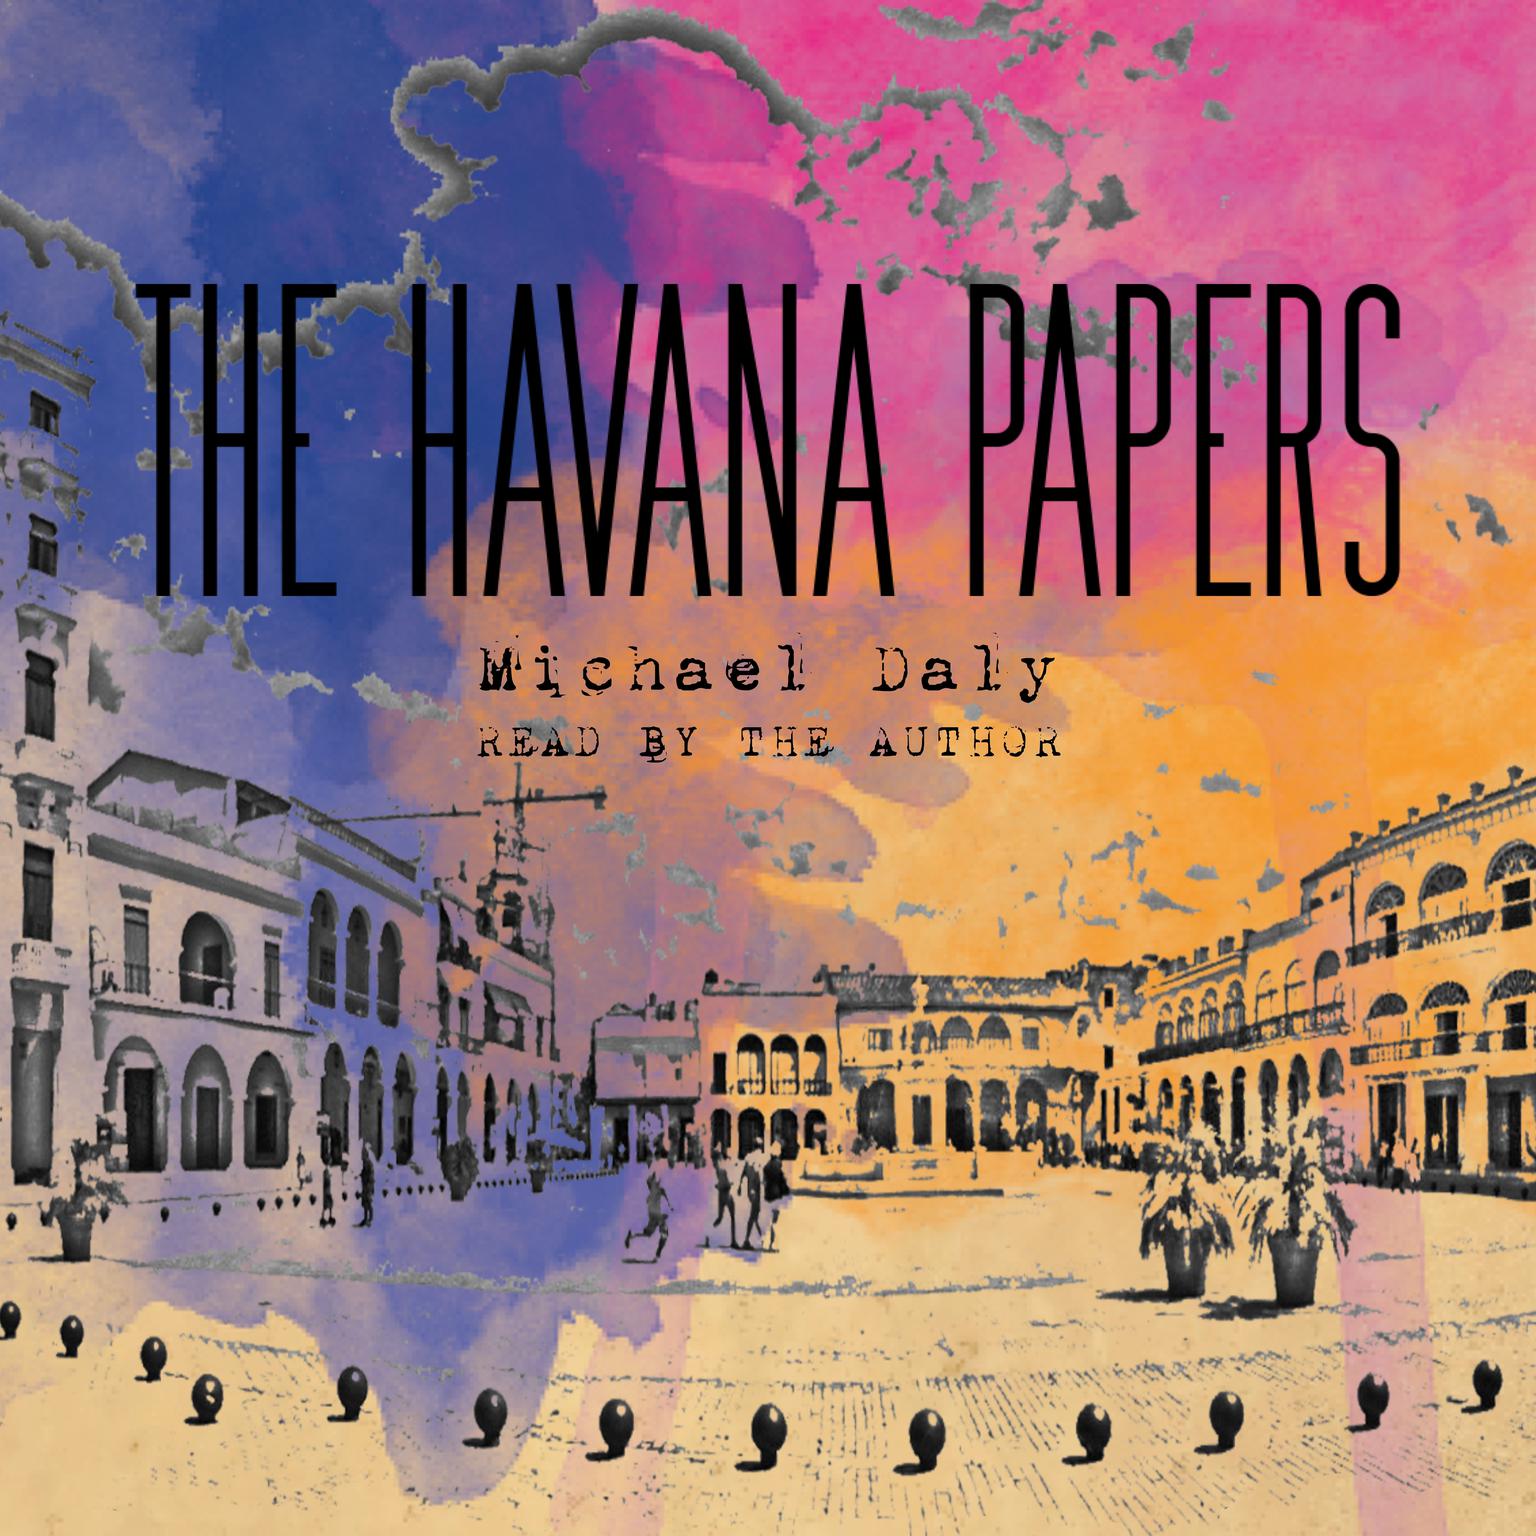 The Havana Papers Audiobook, by Michael Daly